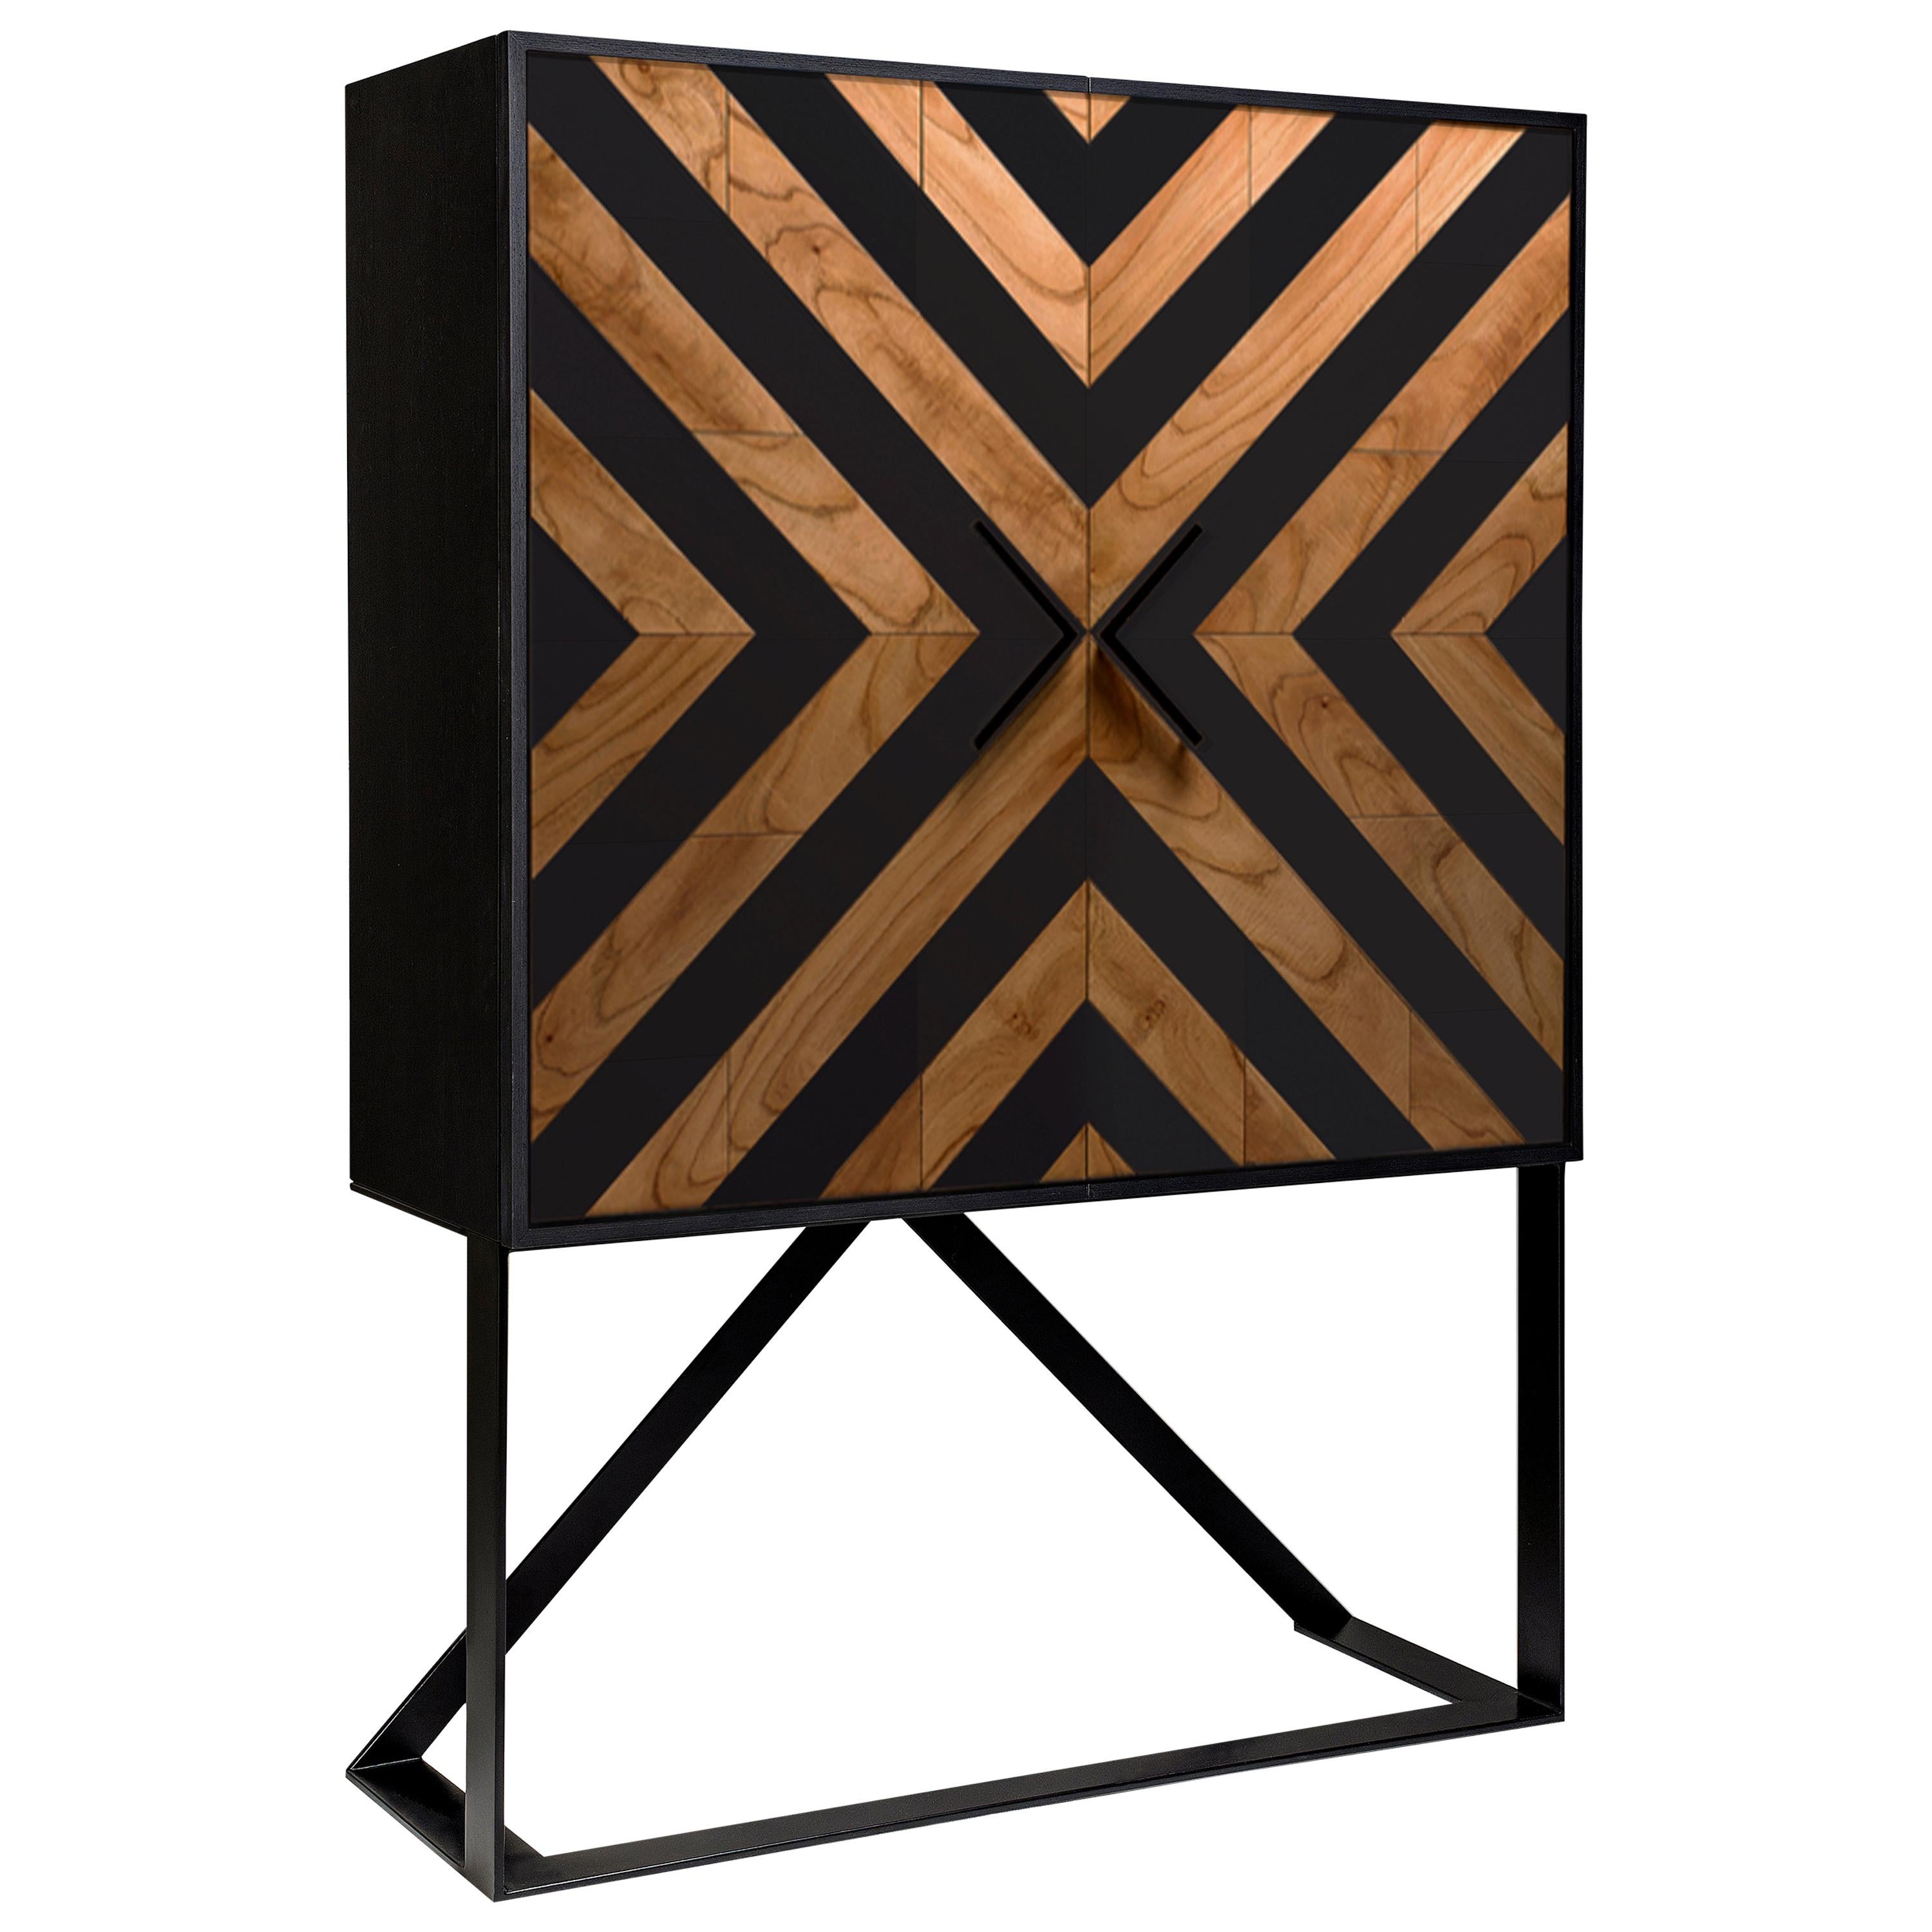 Created by international designer Larissa Batista and handcrafted by skilled woodworkers in one of our studio's factories, this contemporary piece is a home decor must-have. Fusing its mid-century modern design origin with the designer's